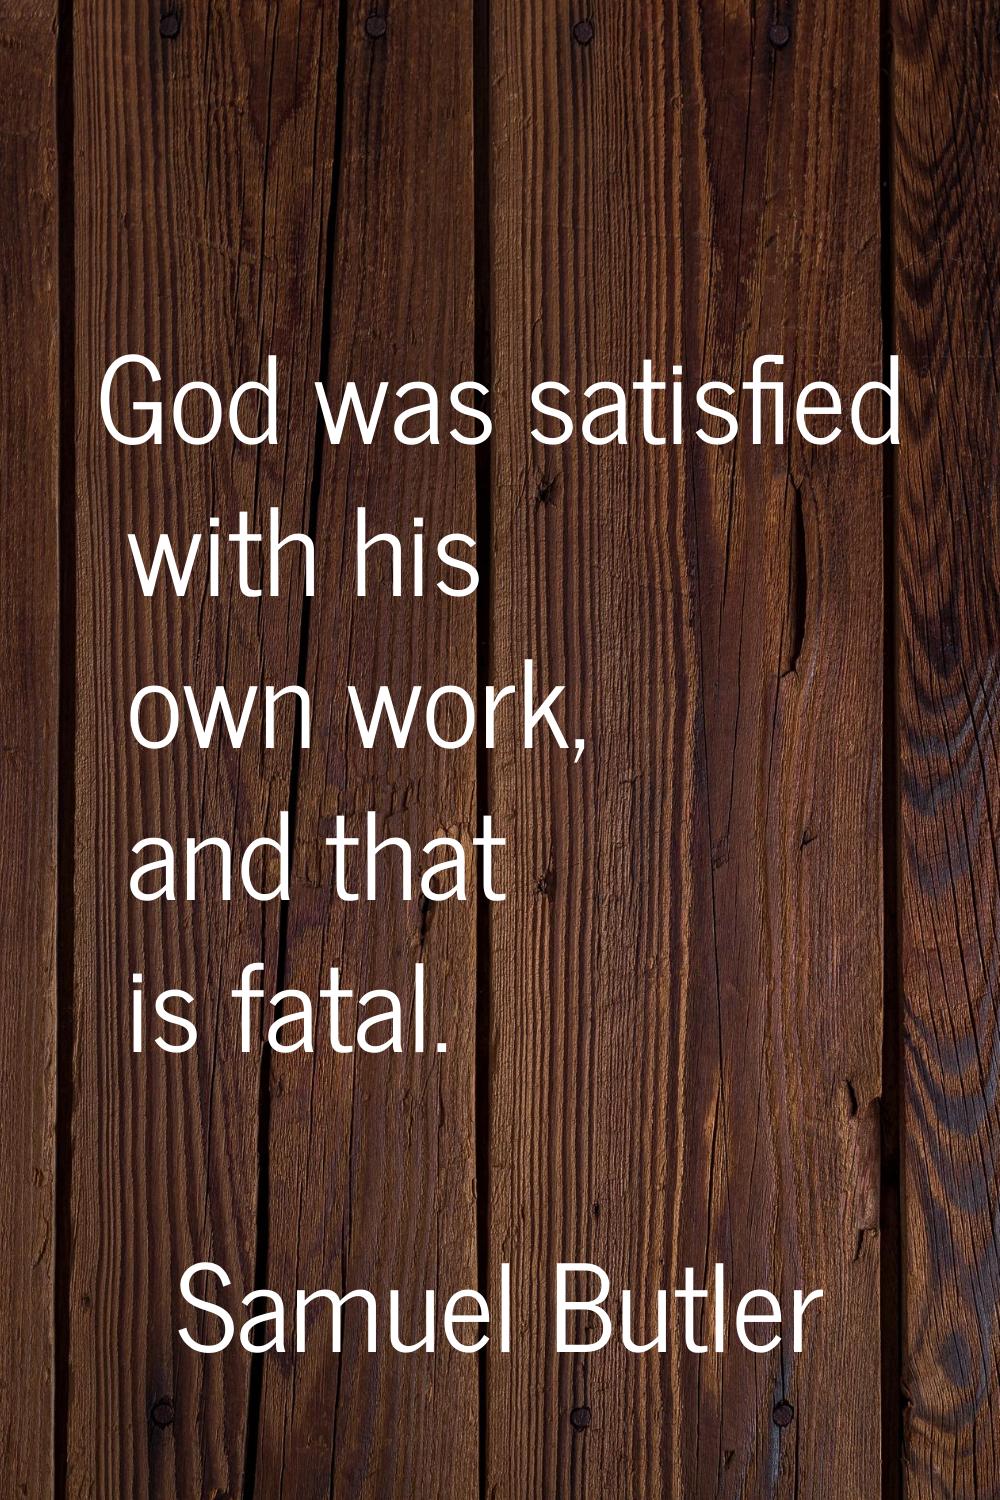 God was satisfied with his own work, and that is fatal.